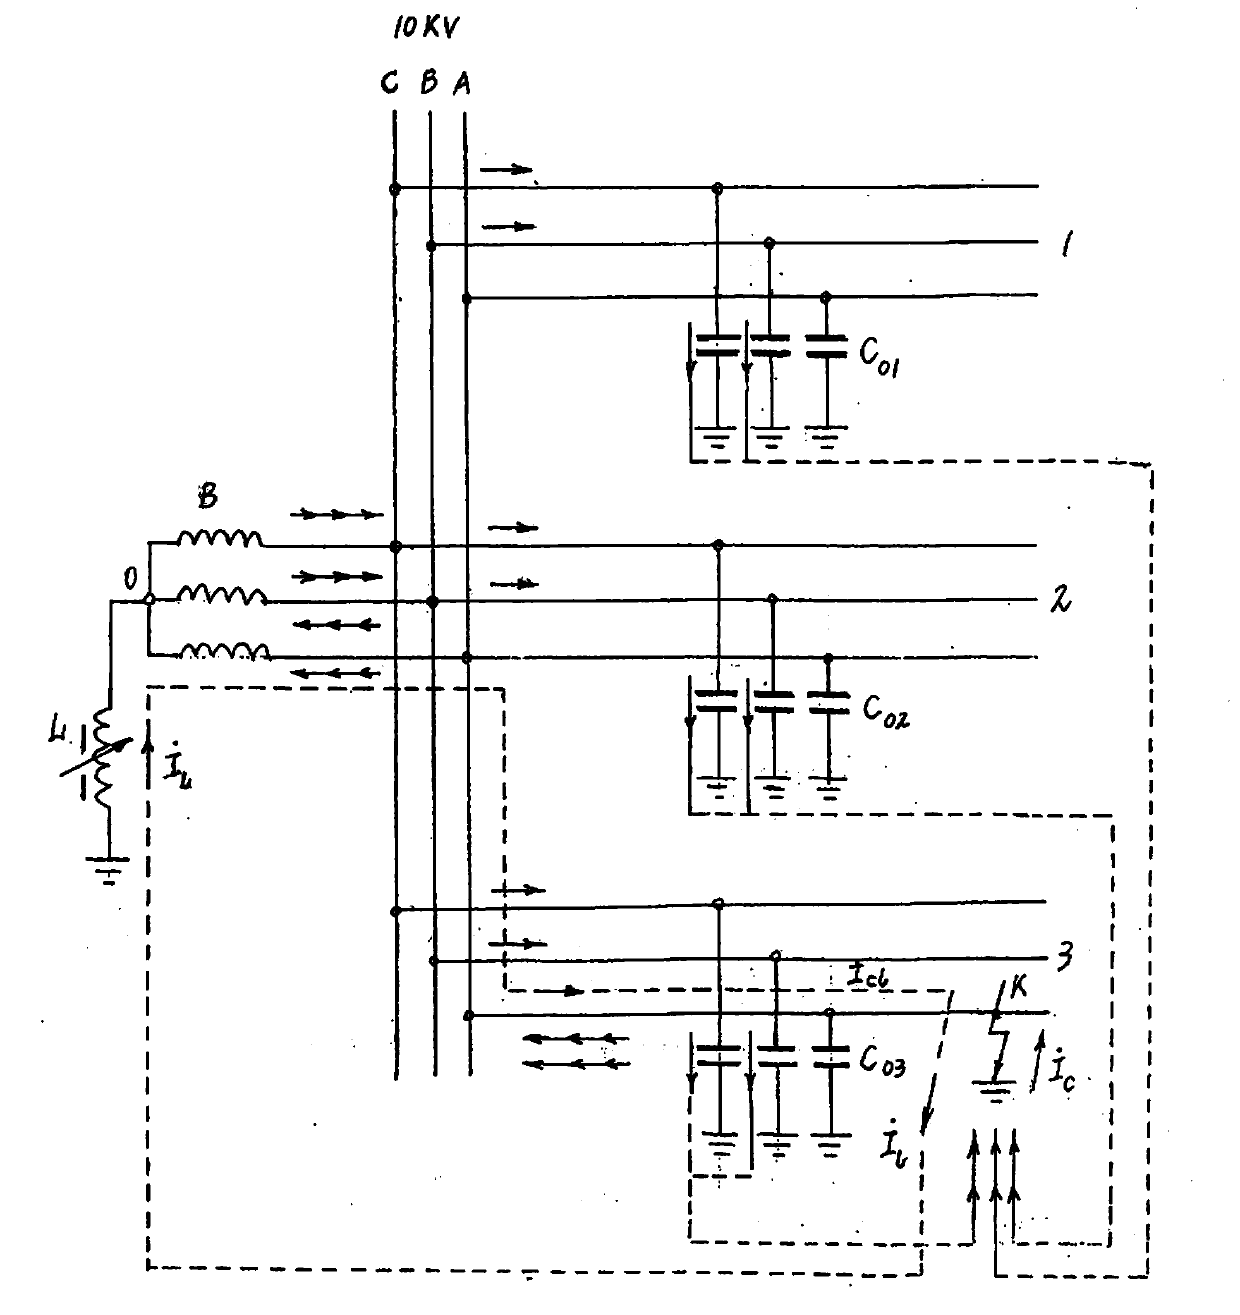 Grounding line selecting and ground fault section positioning method for arc suppression coil